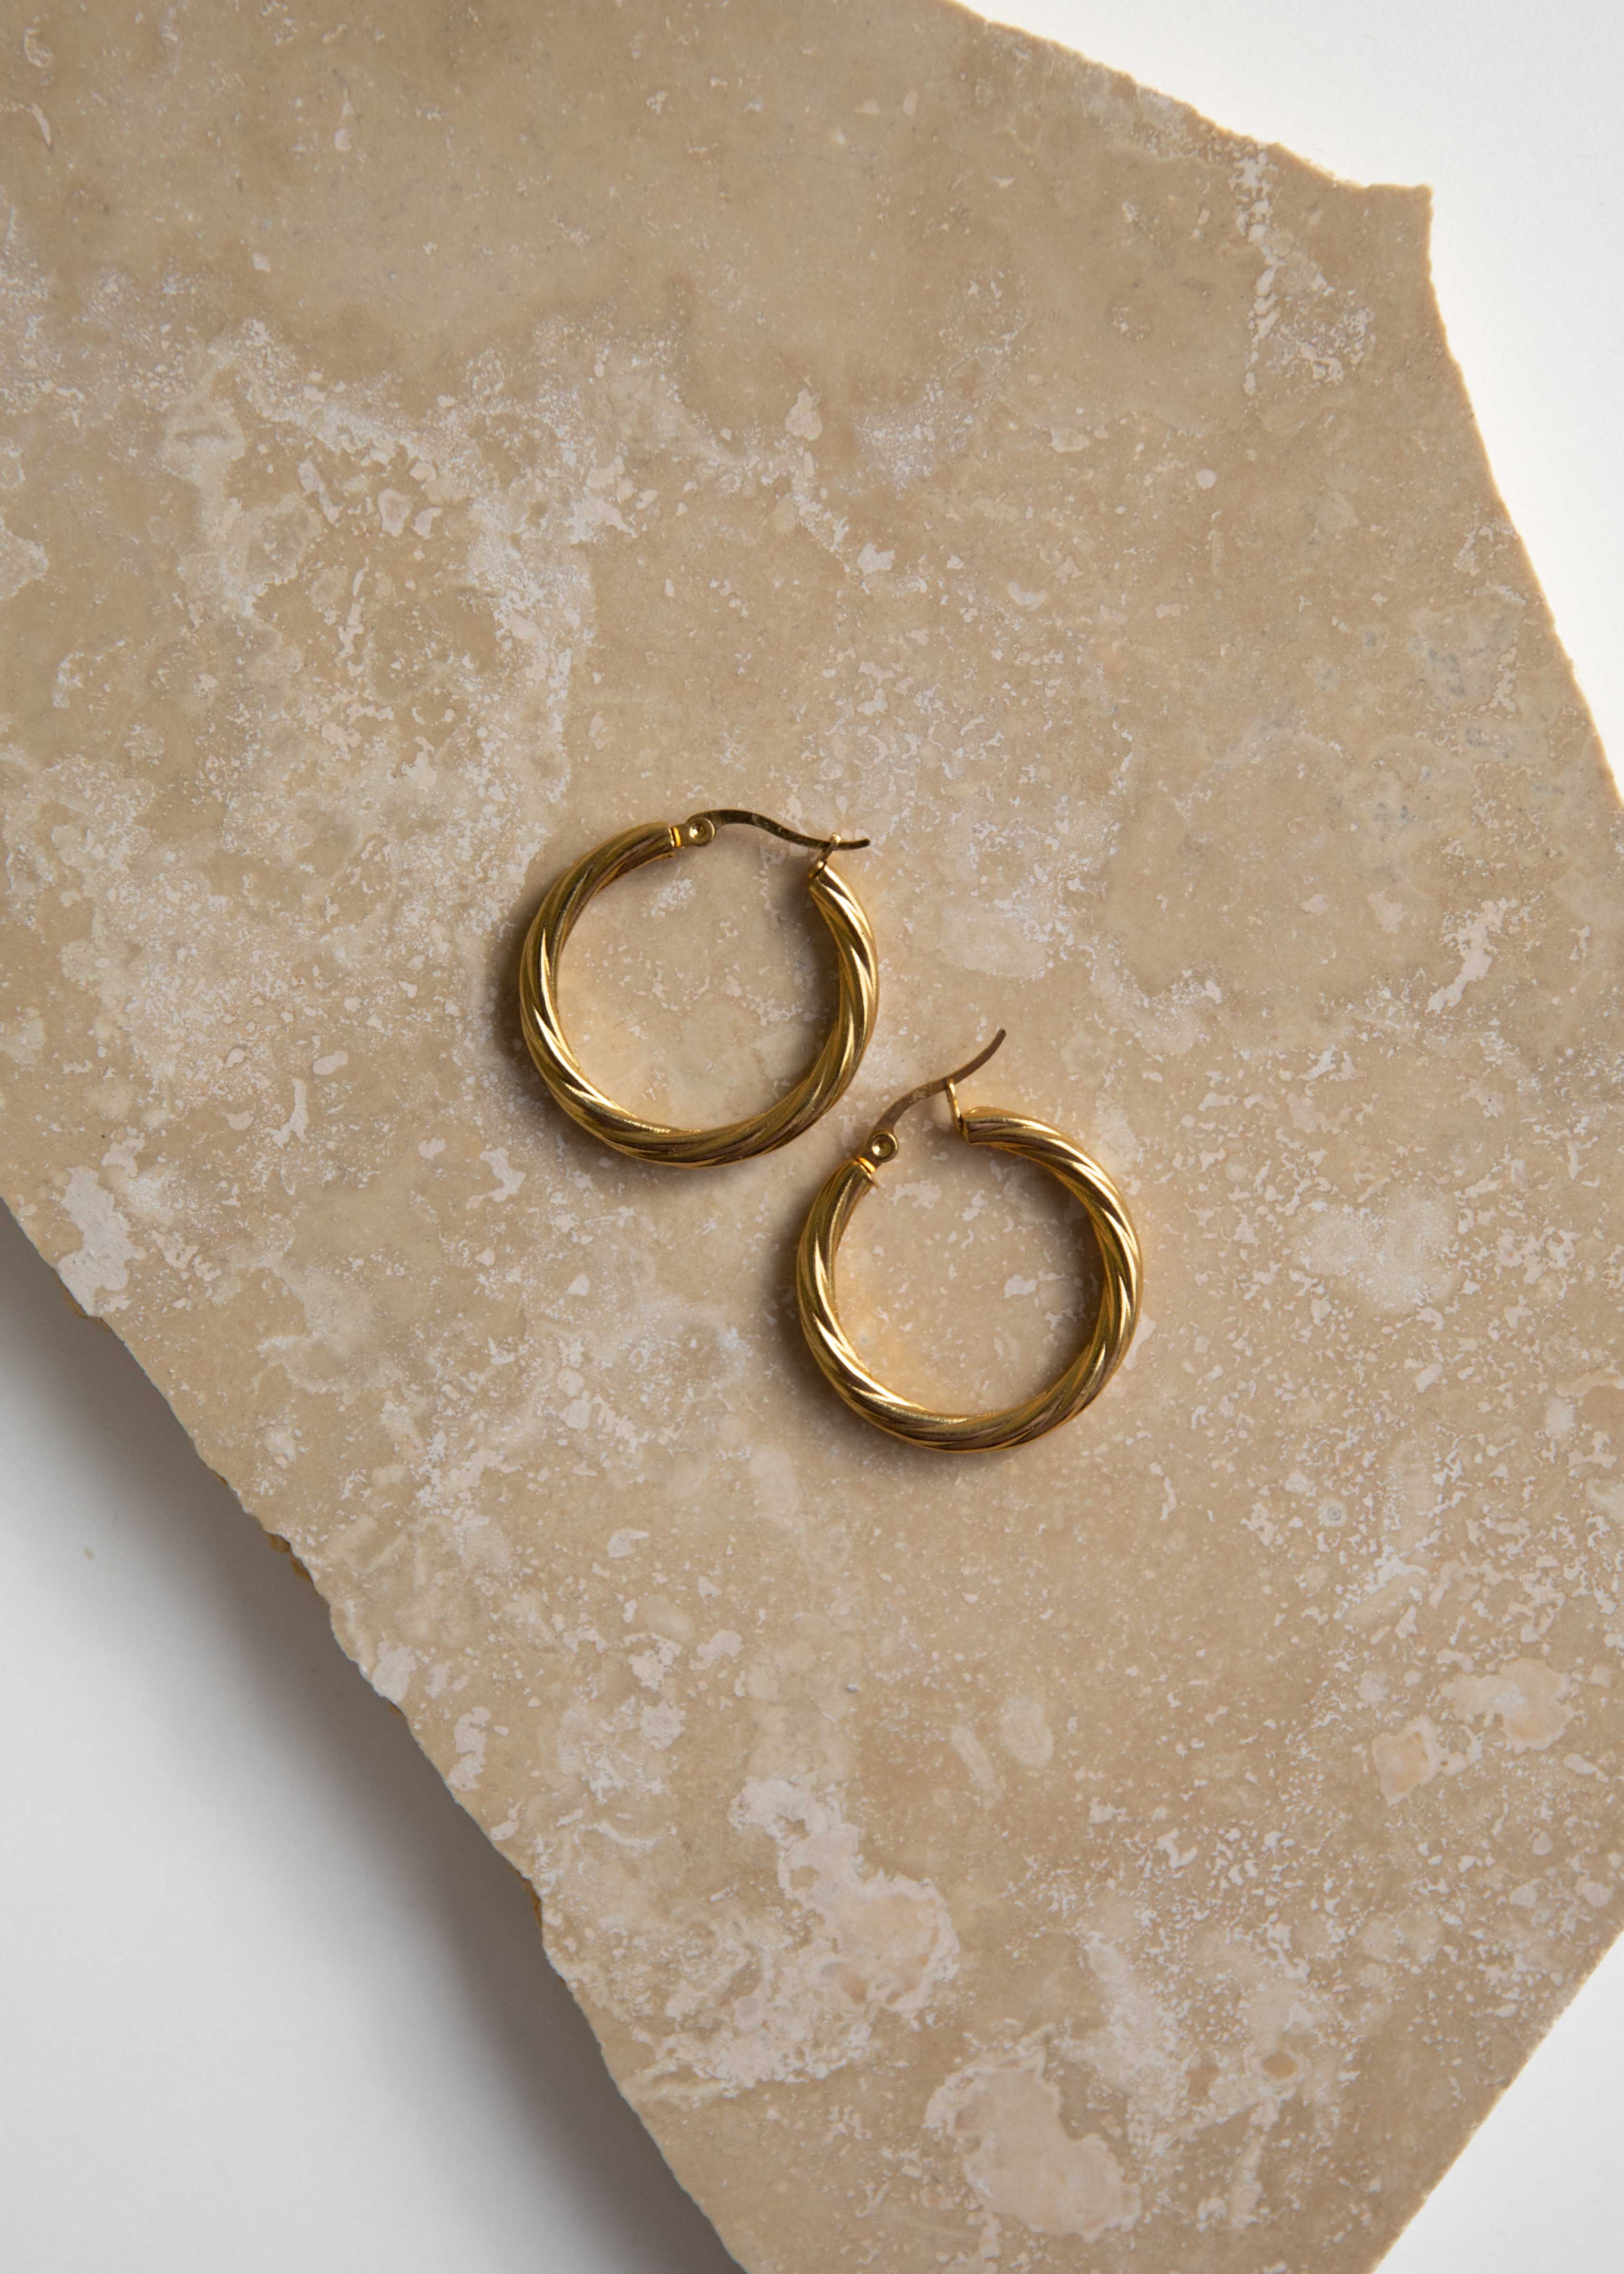 Claire039s 18k Gold Plated Small Hoop Earrings  eBay